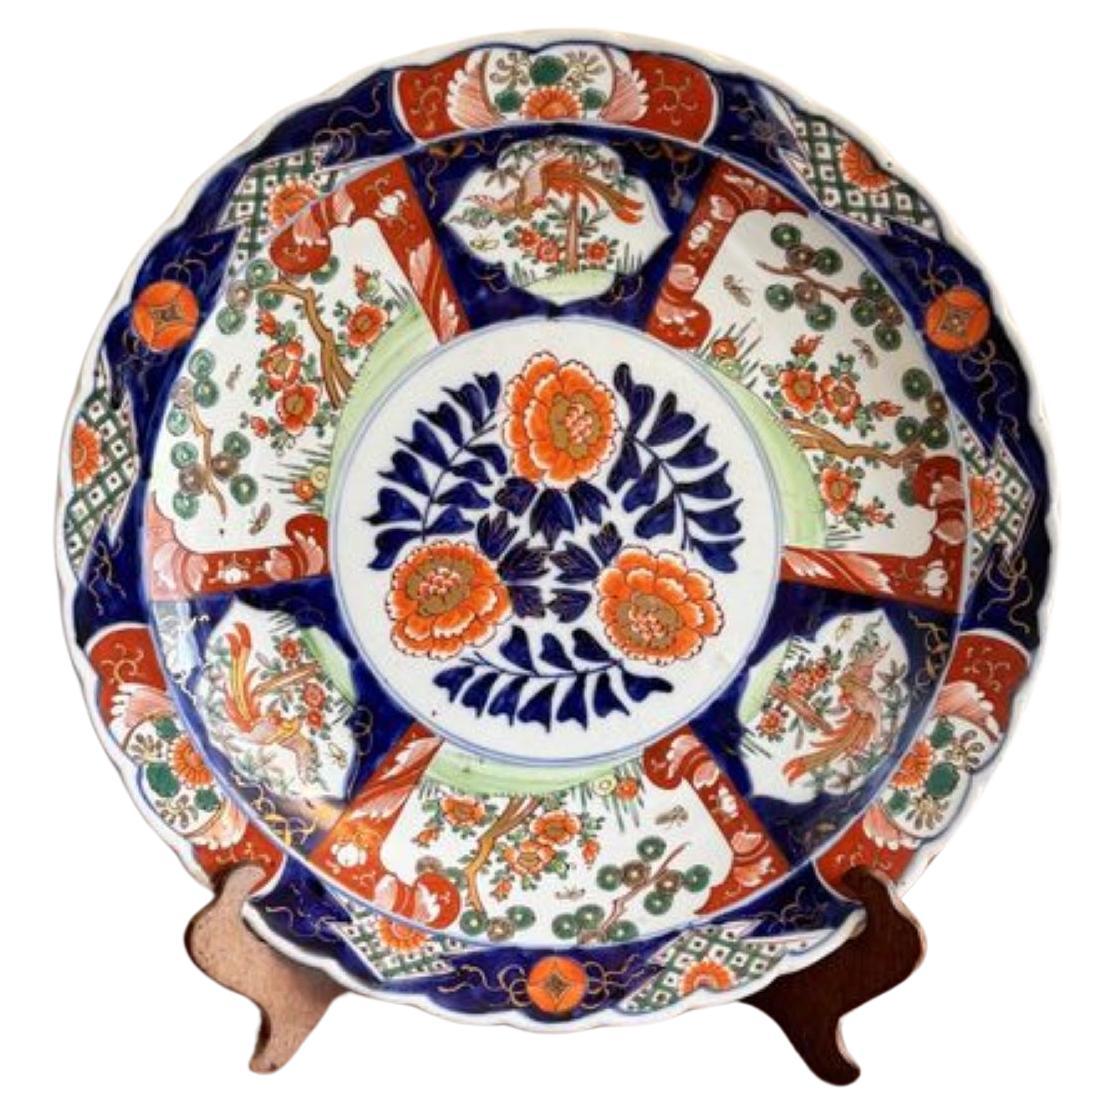 Outstanding quality antique Japanese imari charger 